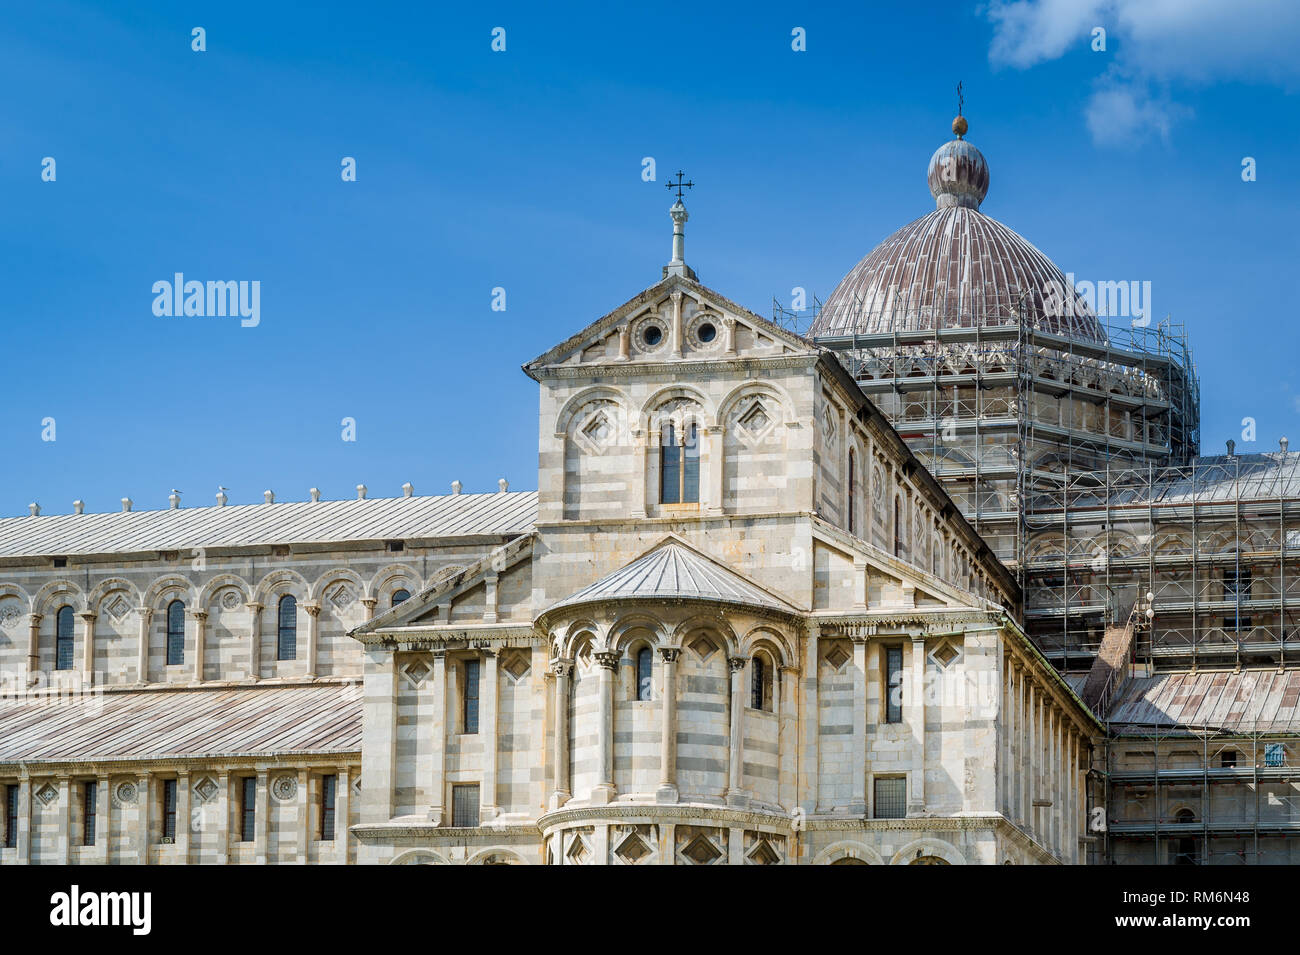 Duomo di Pisa cathedral at the central square of Pisa. Toscana province, Italy. Stock Photo